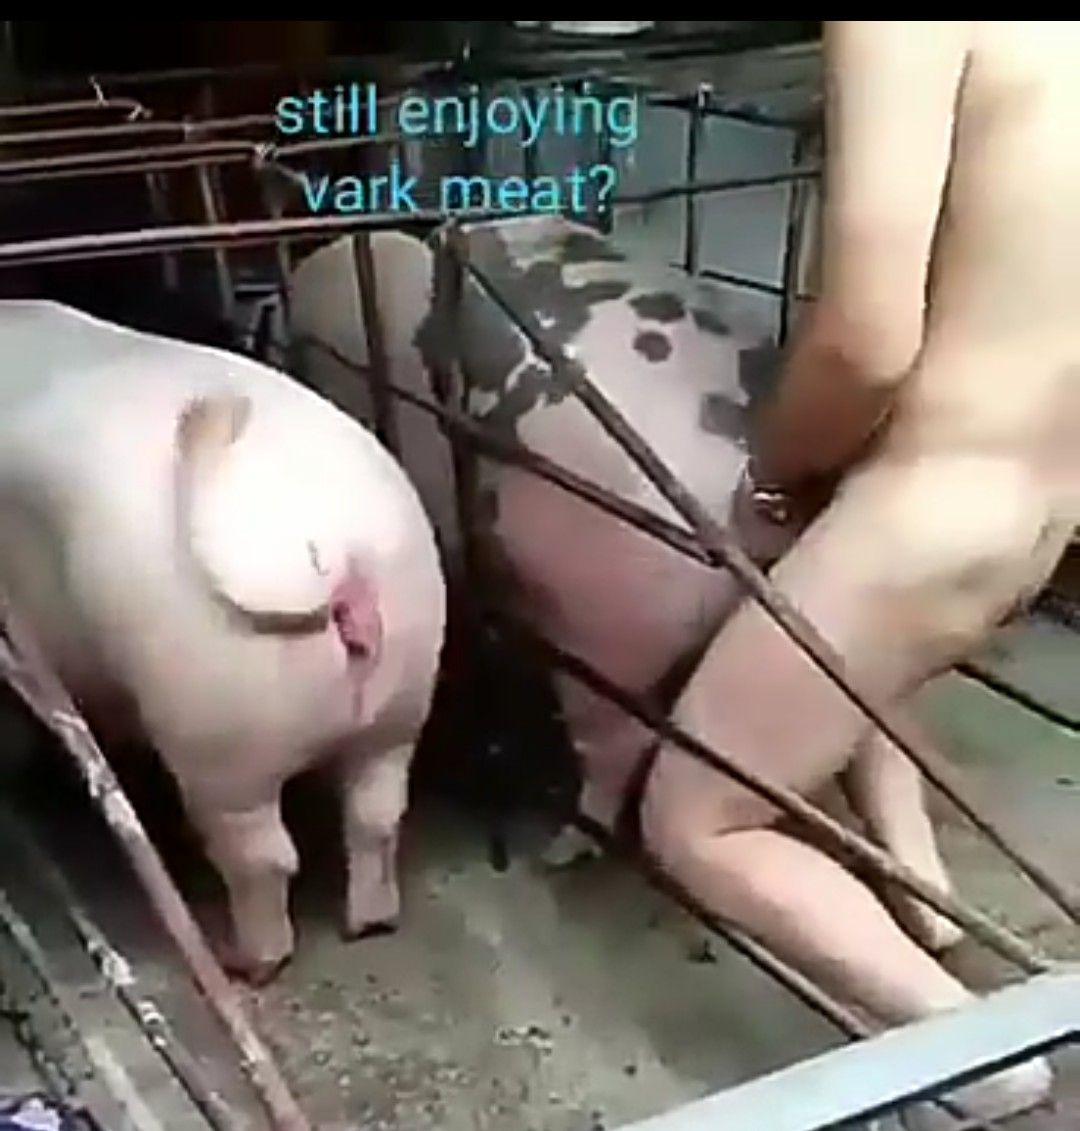 People having sex with a pig